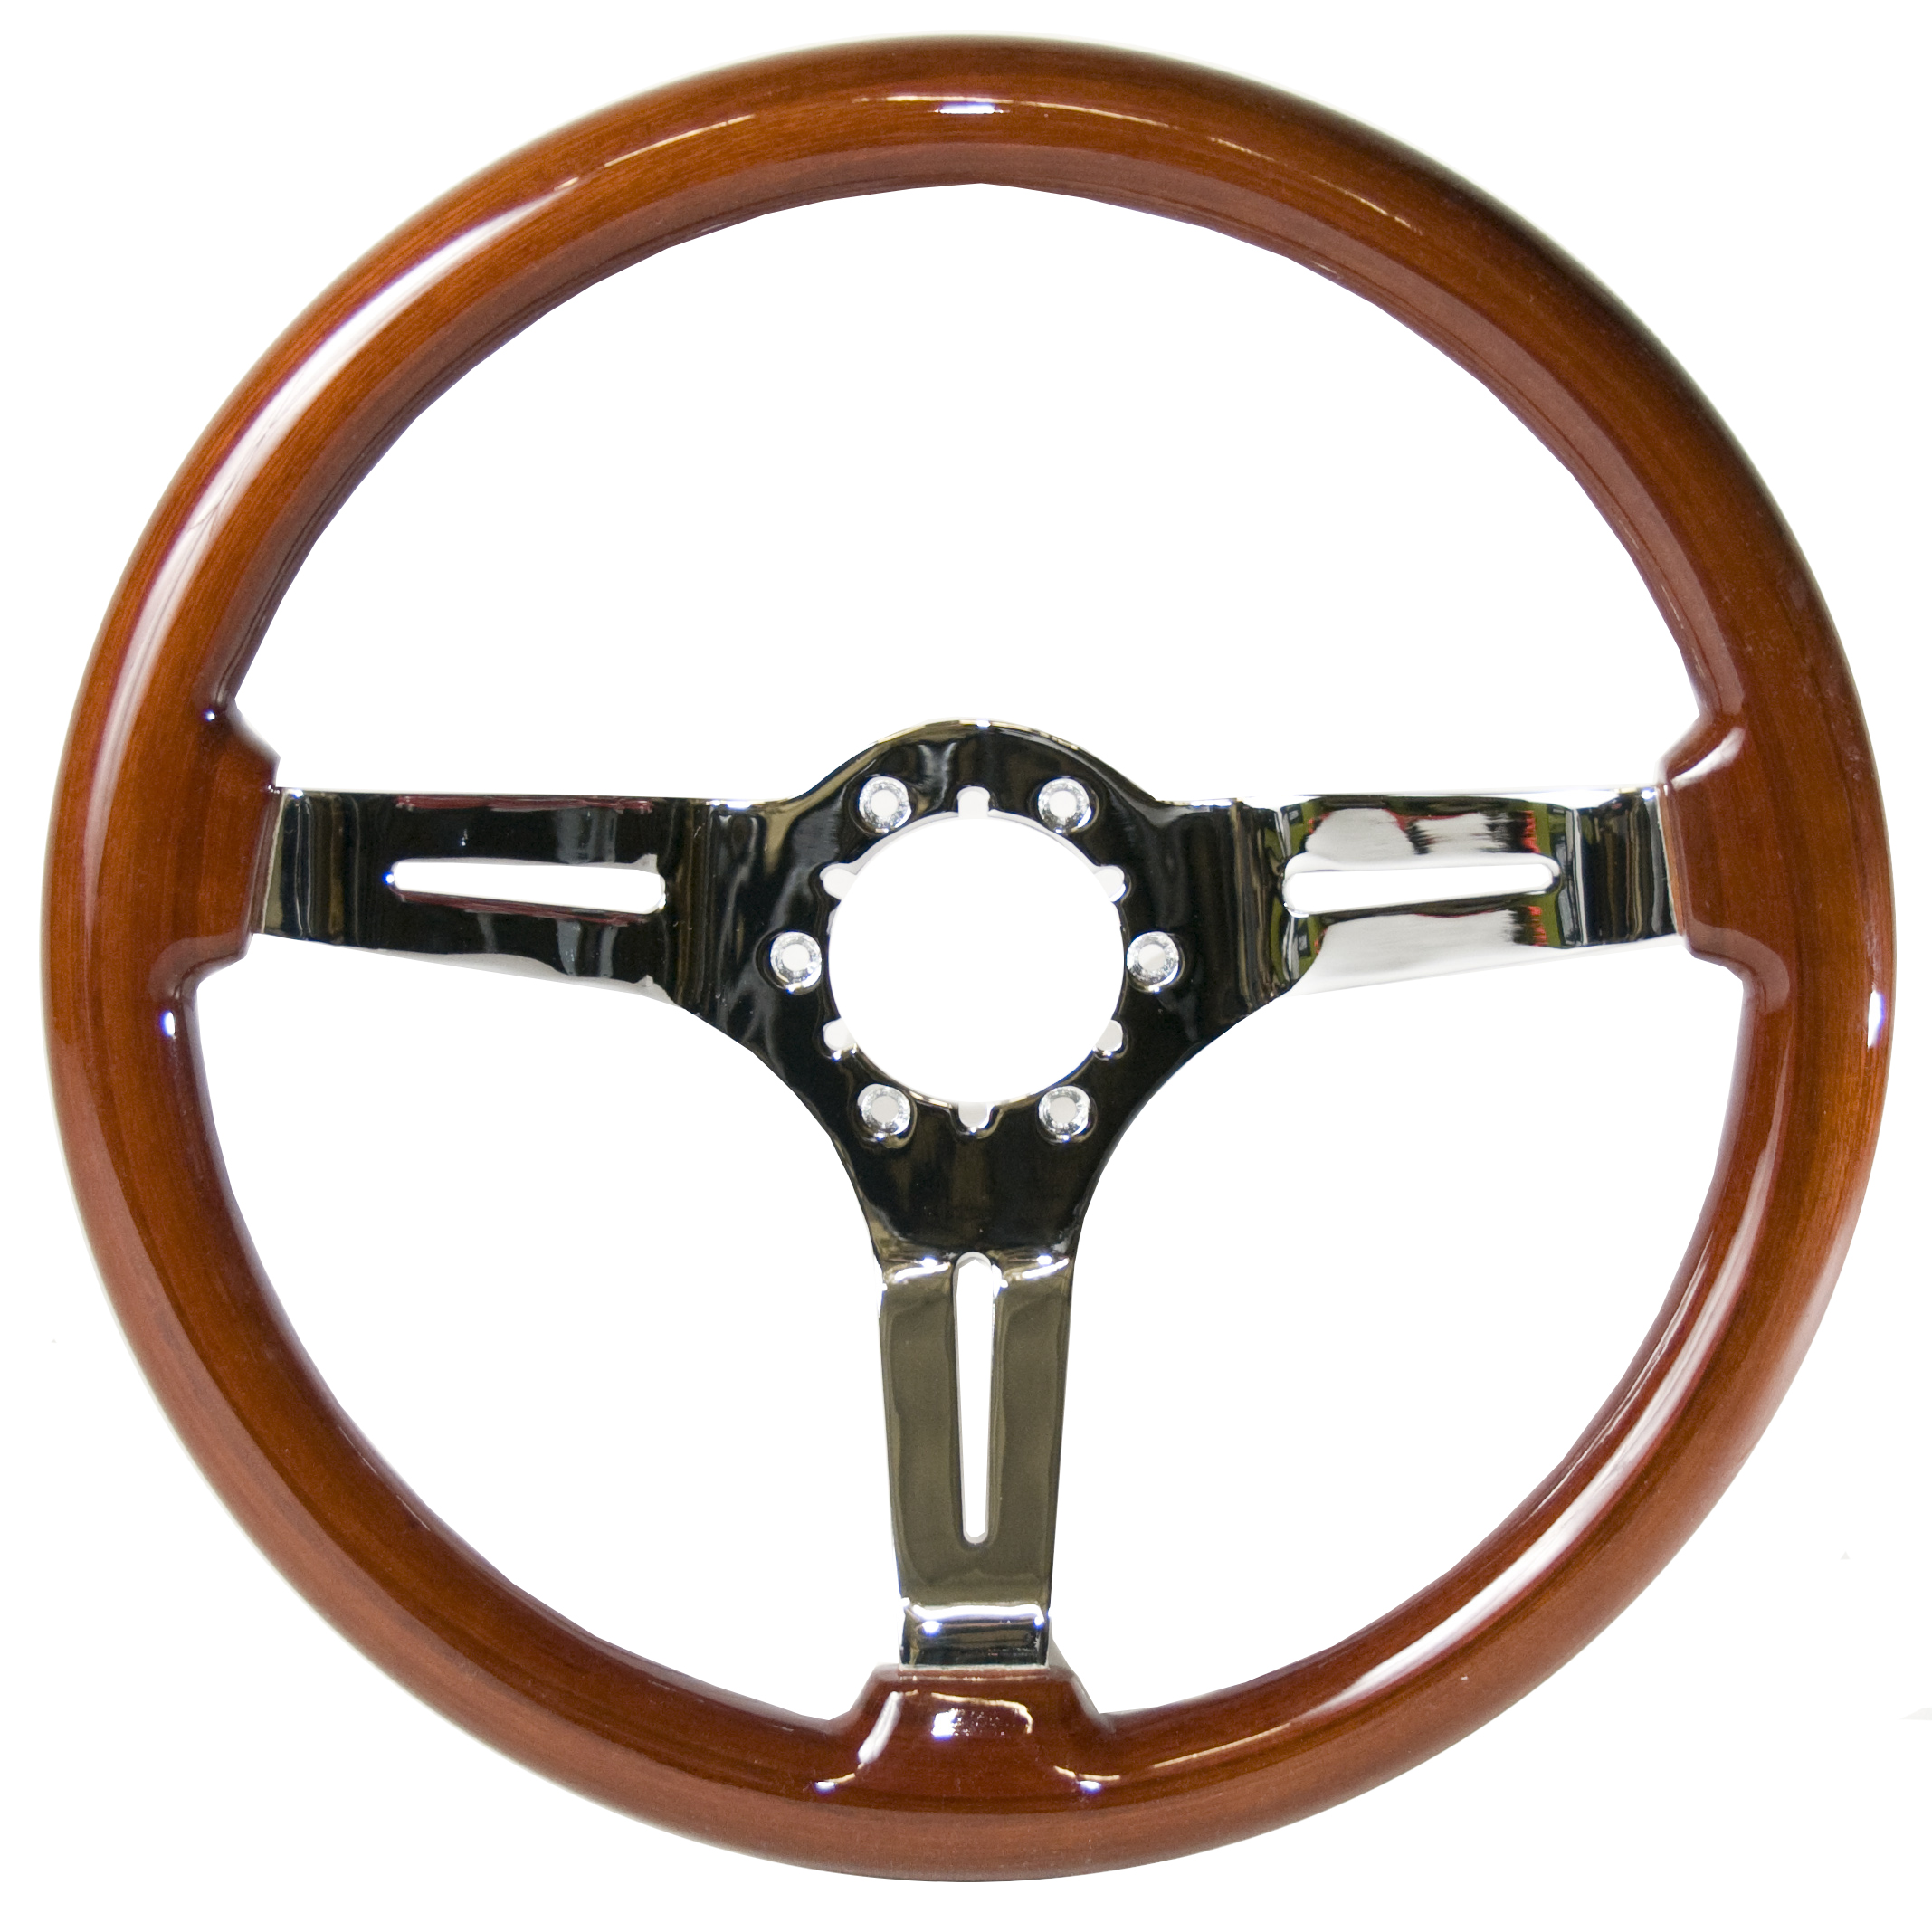 Auto Pro 14" Rosewood Steering Wheel with Chrome Spokes